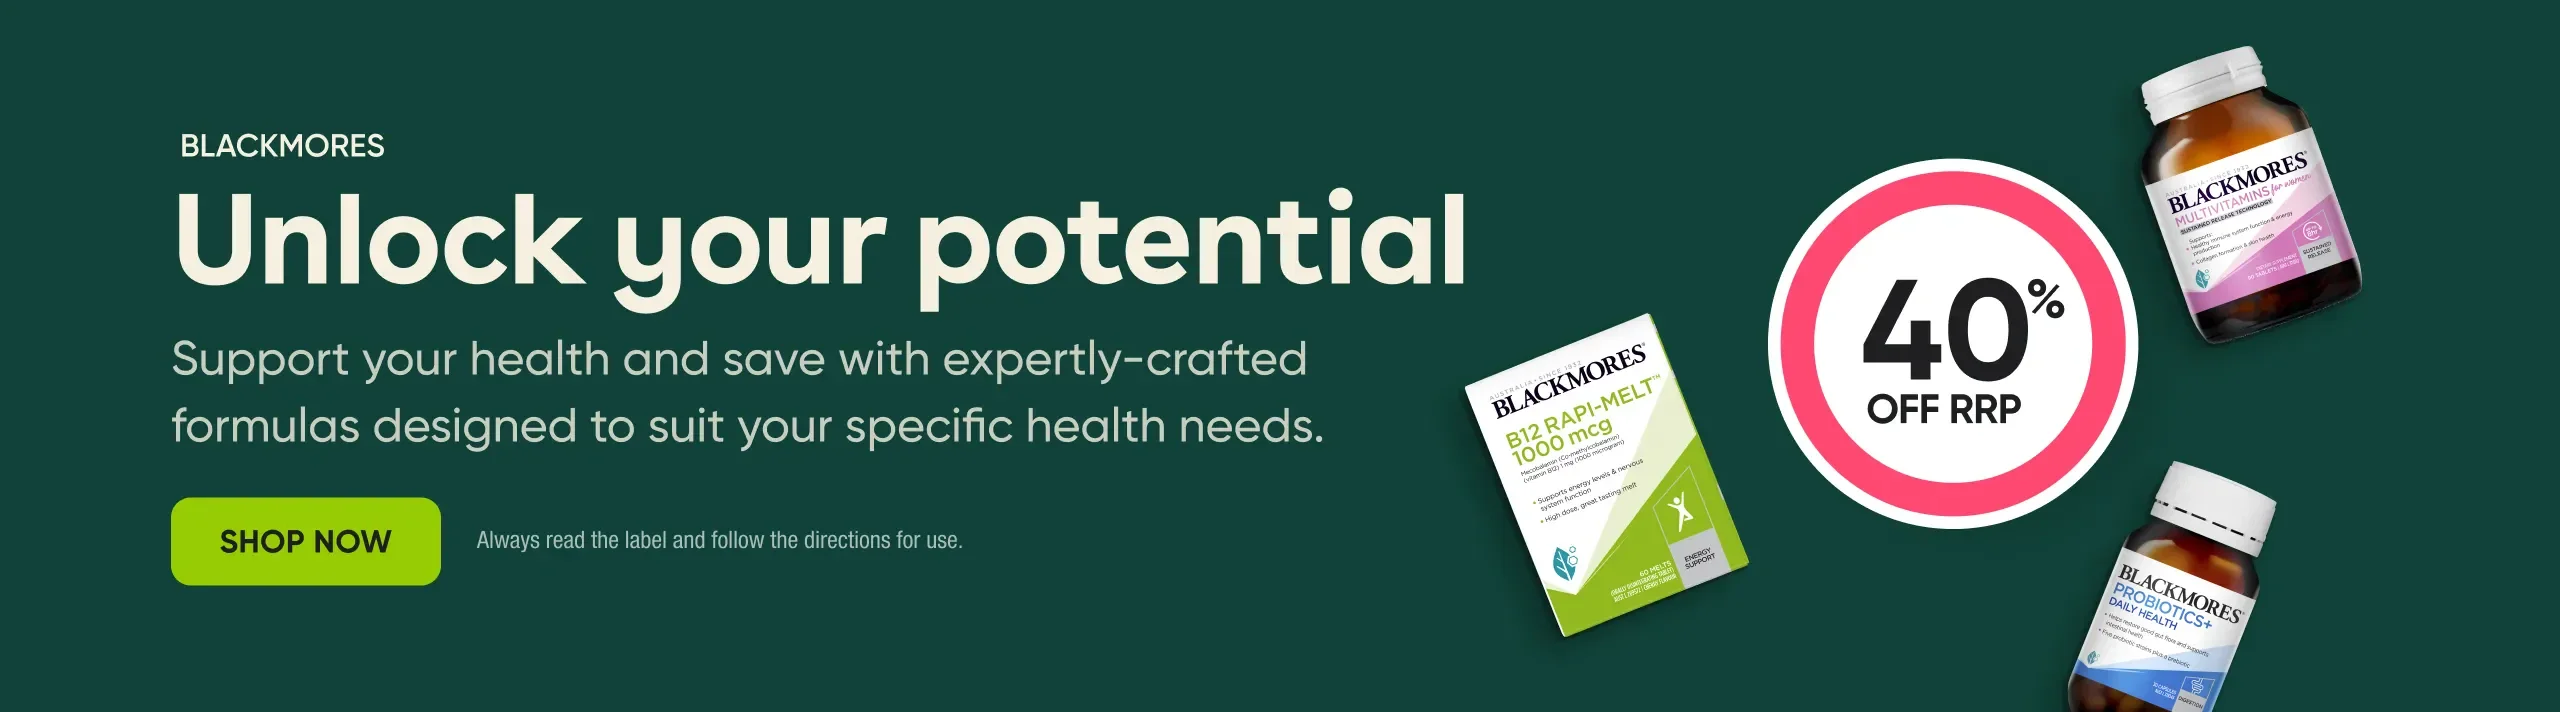 Blackmores: Unlock your potential - Support your health and save with expertly-crafted formulas designed to suit your specific health needs.